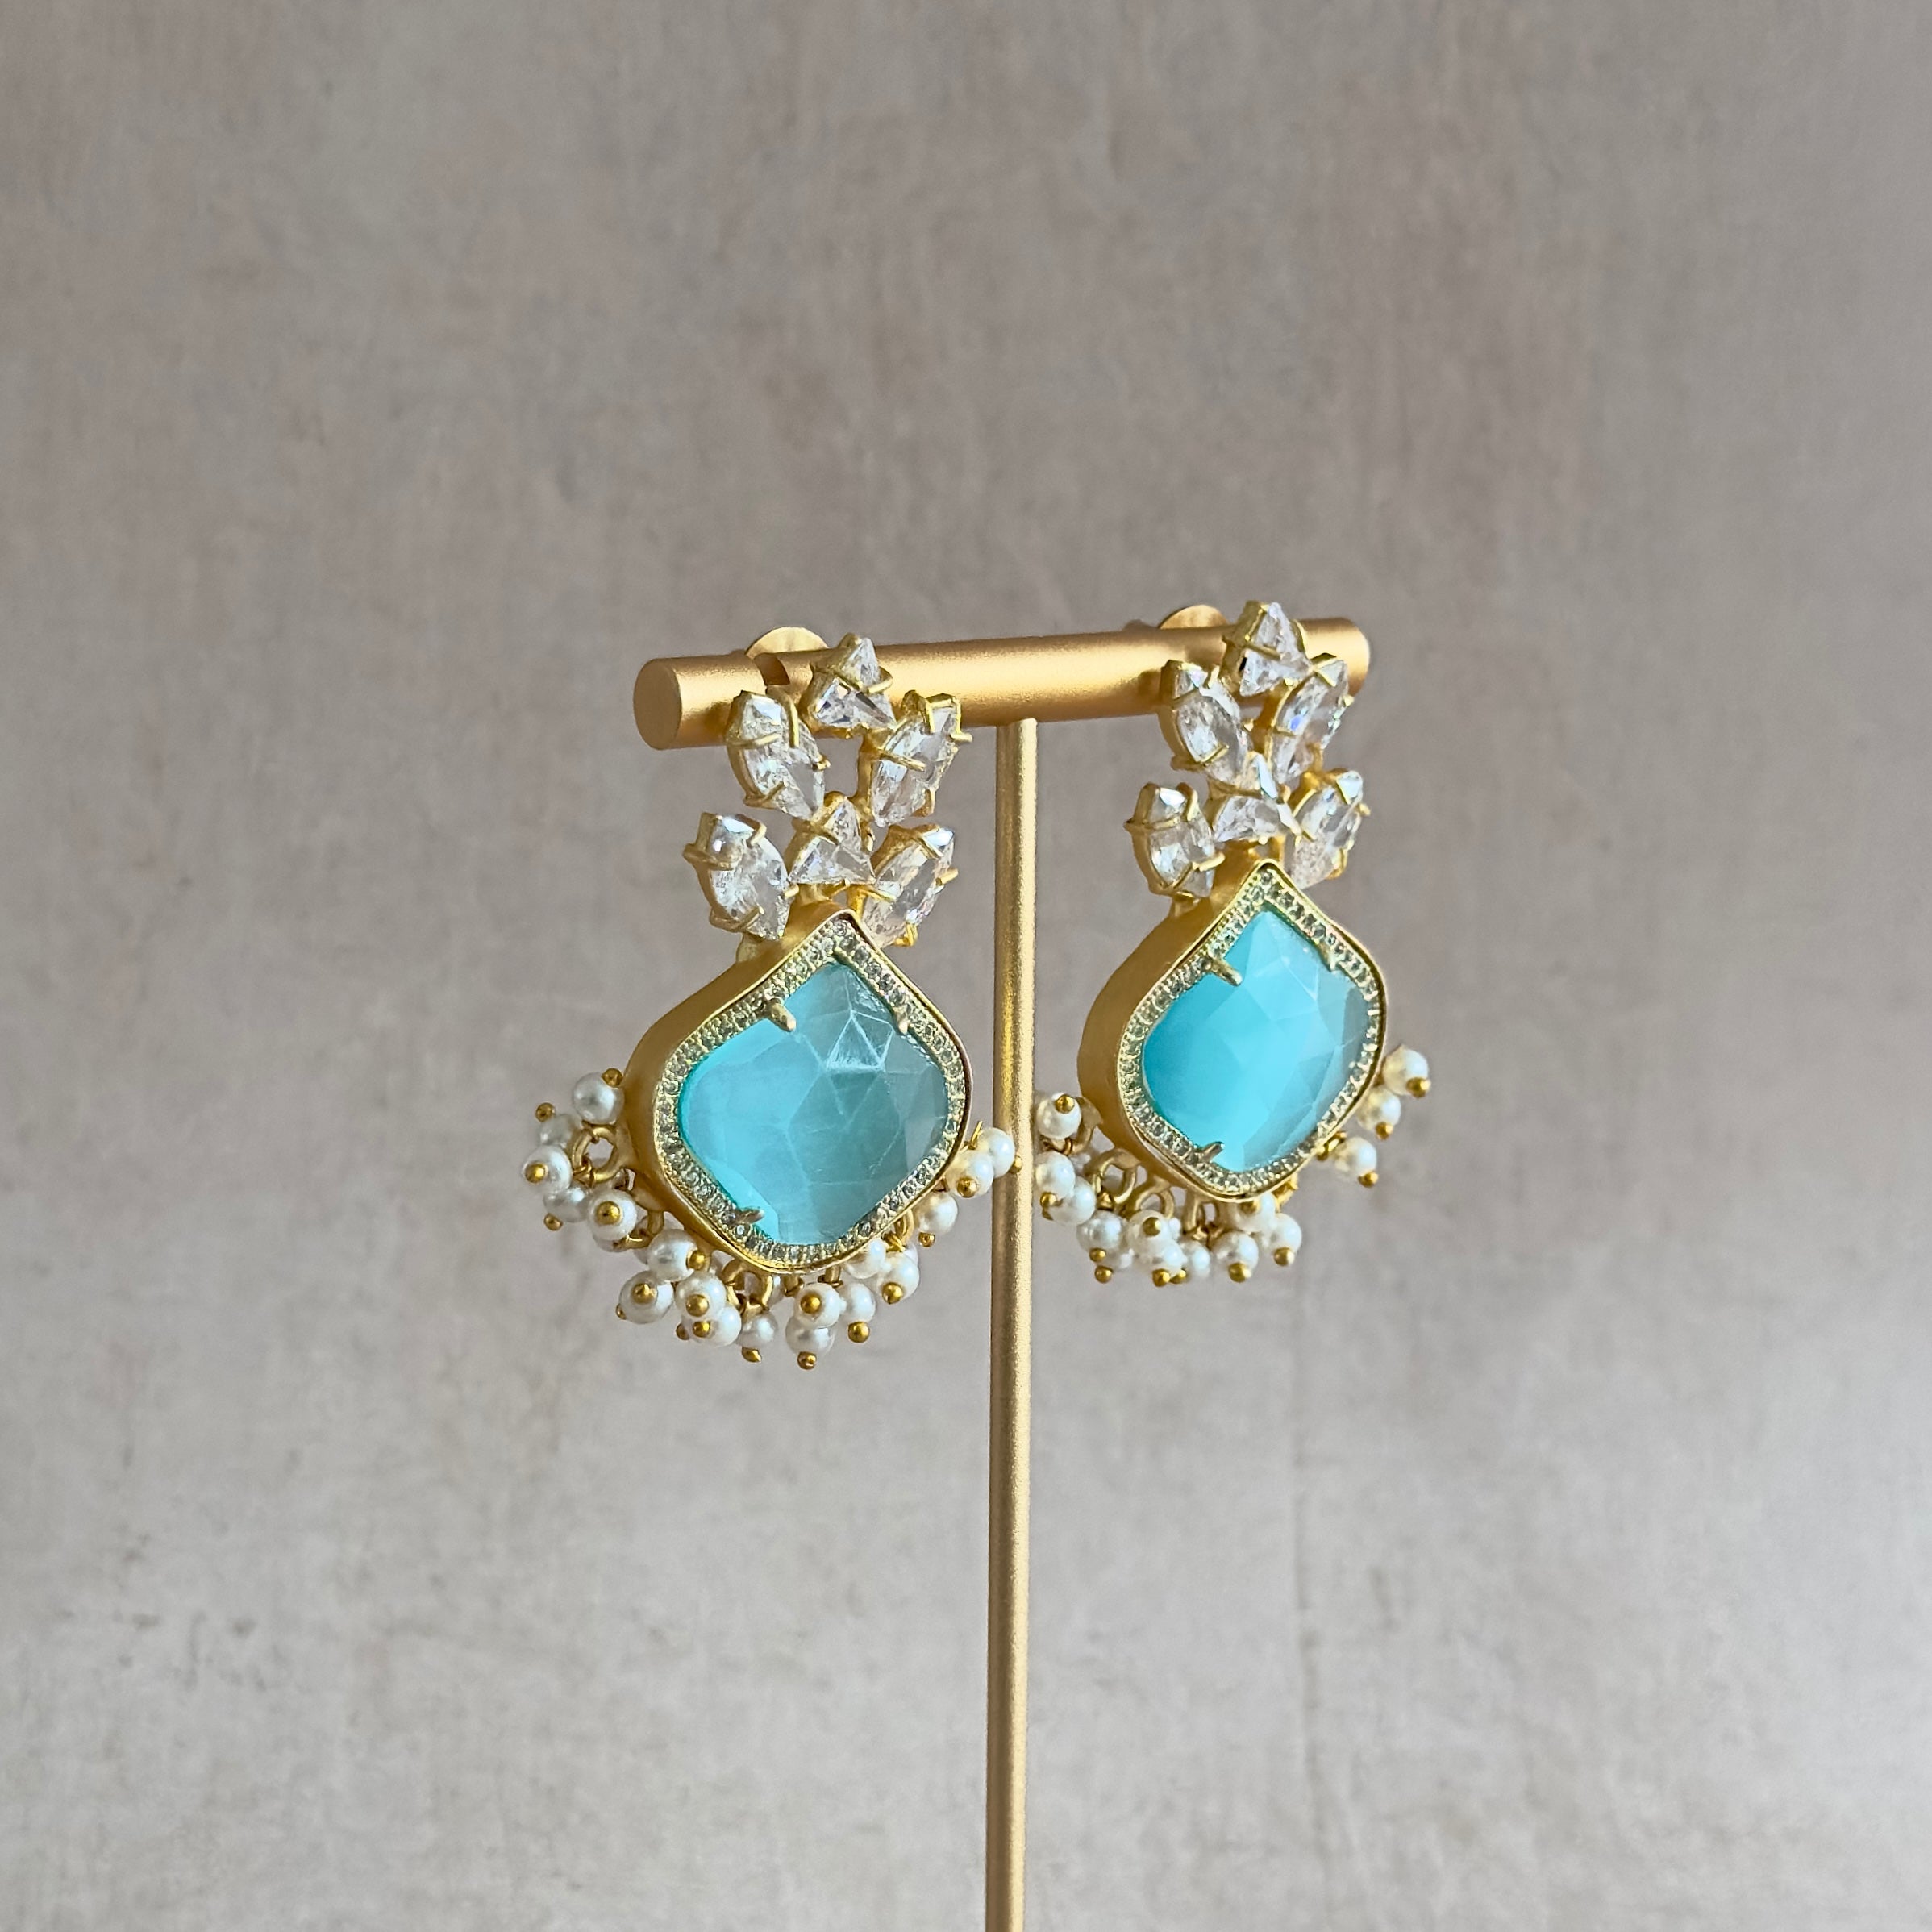 Indulge in the beauty and luxury of Isabella Crystal Earrings! These stunning statement earrings feature luscious aquamarine stones, inspired by the captivating waters of the Indian Ocean. With the added sparkle of cubic zirconia, these earrings will make a bold and glamorous addition to any outfit. Elevate your style and make a statement with Isabella.